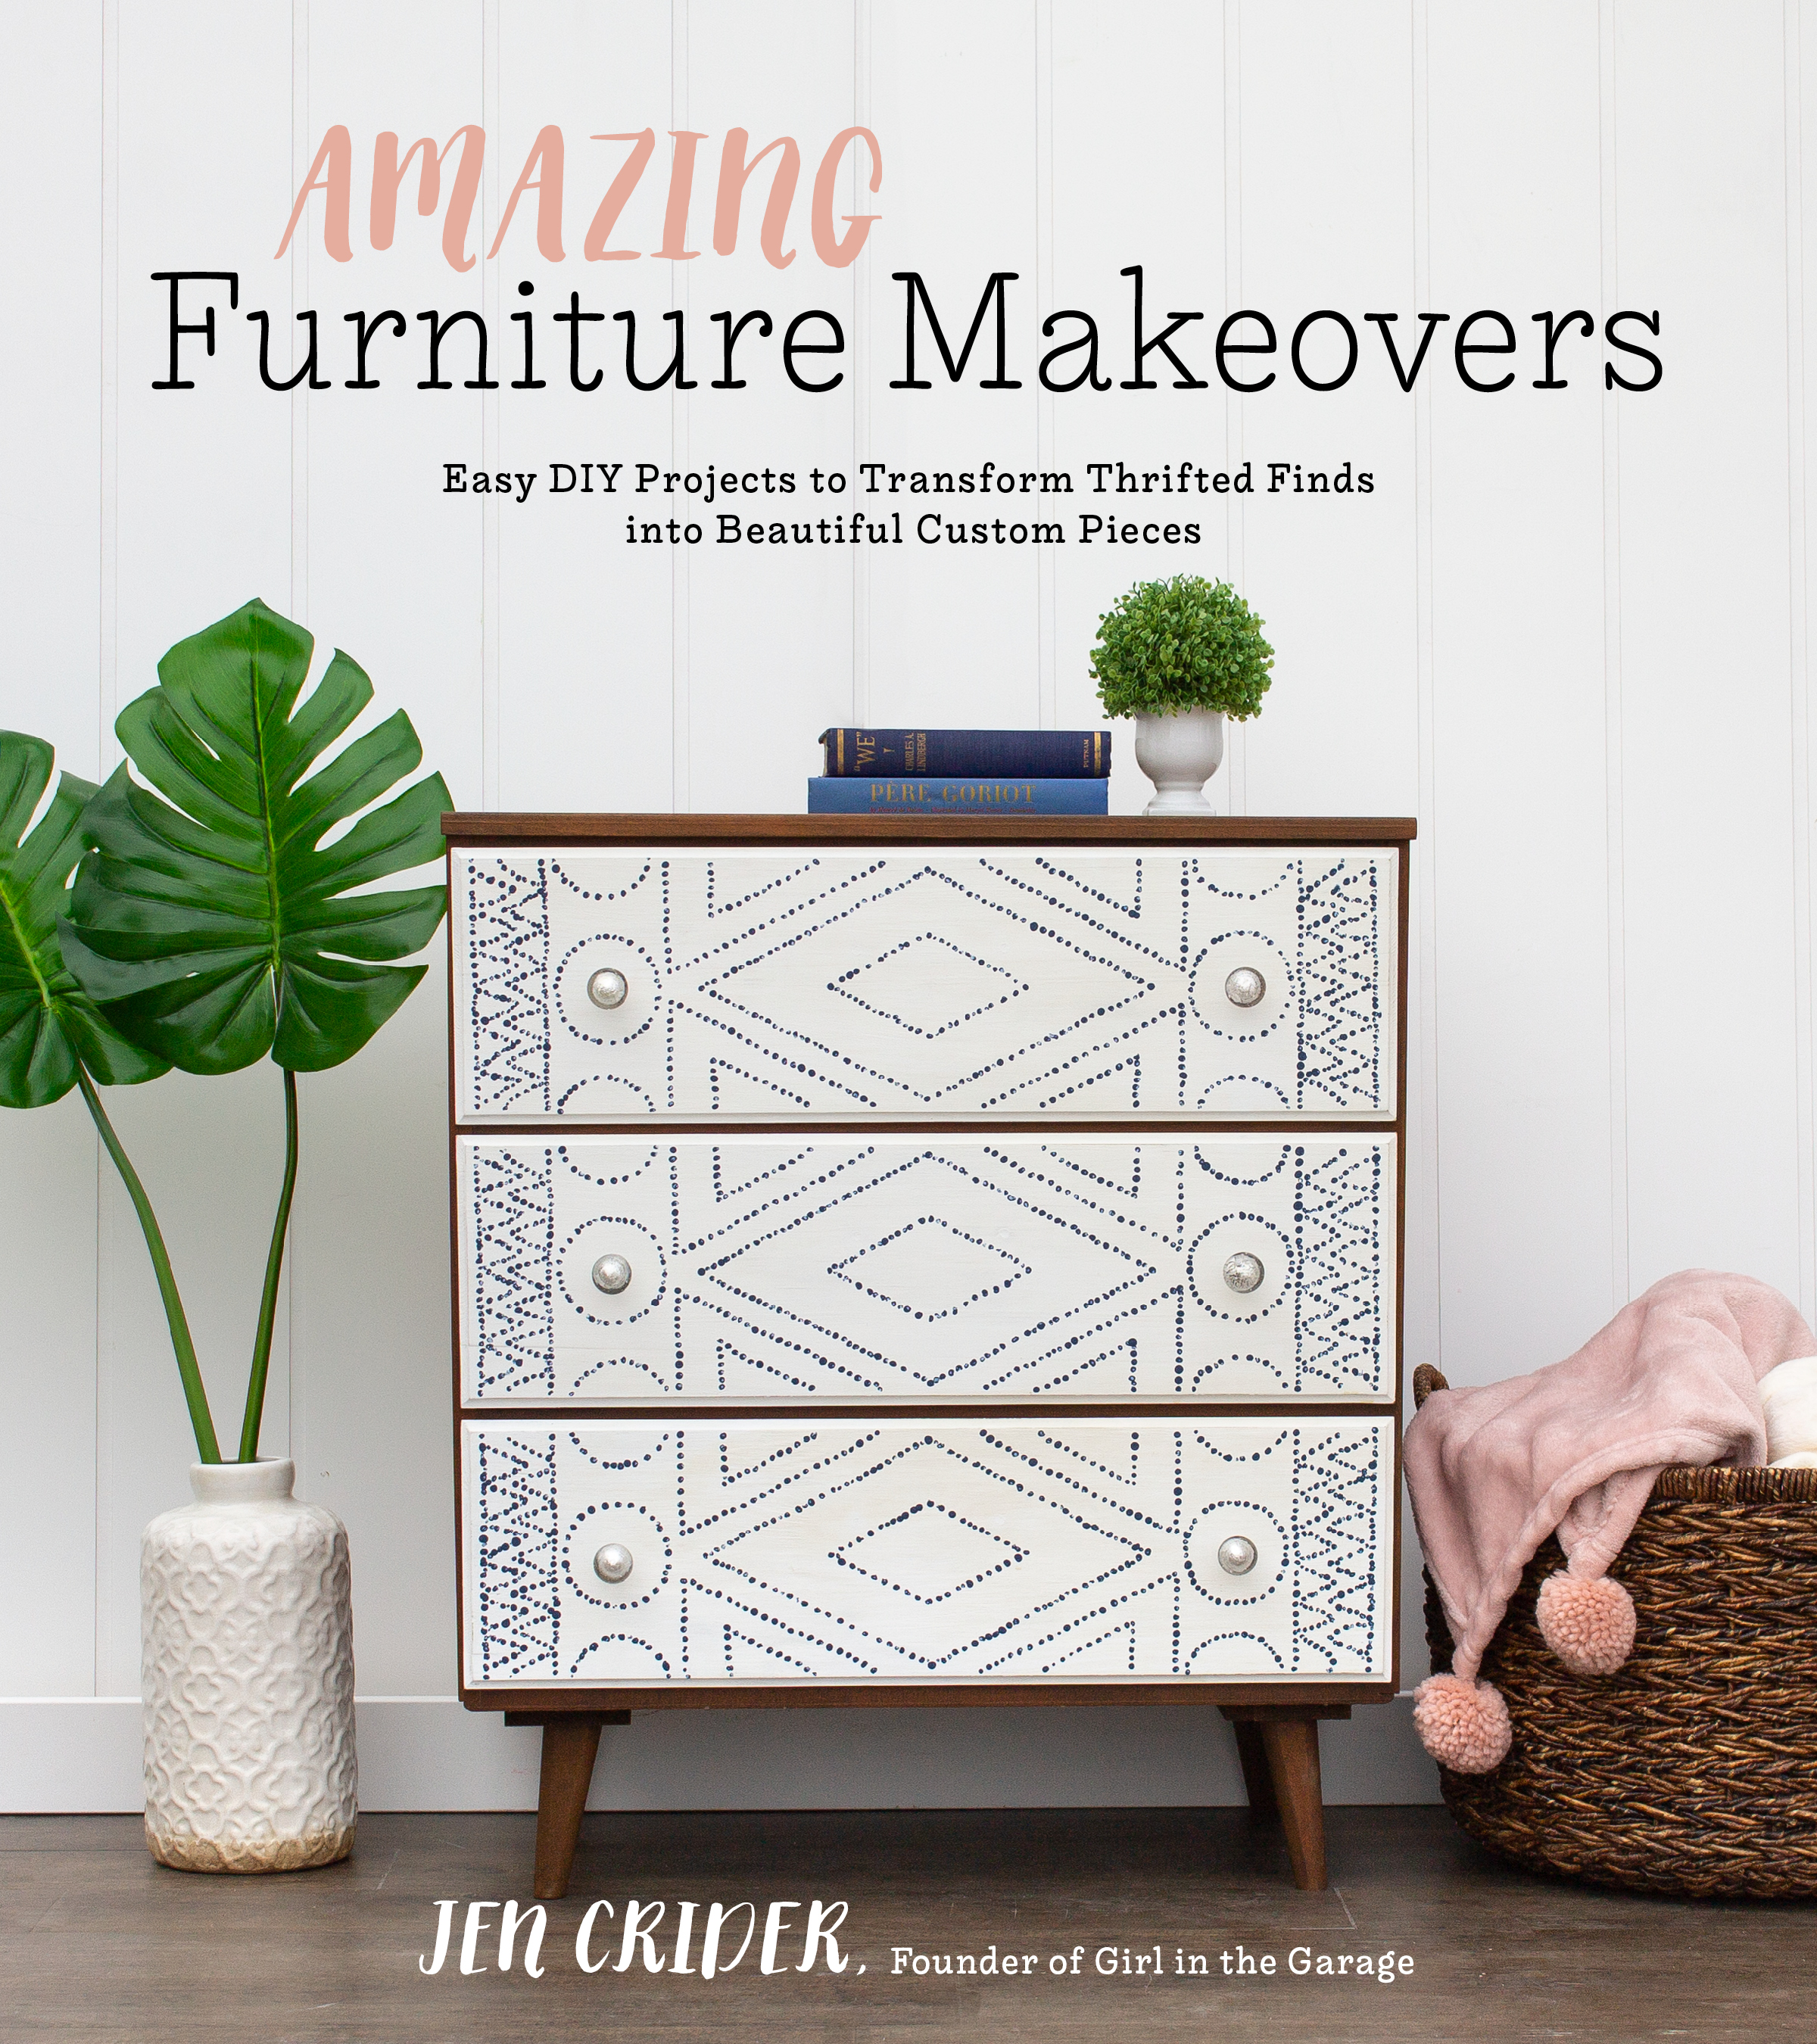 Amazing Furniture Makeovers book - Learn how to makeover furniture.